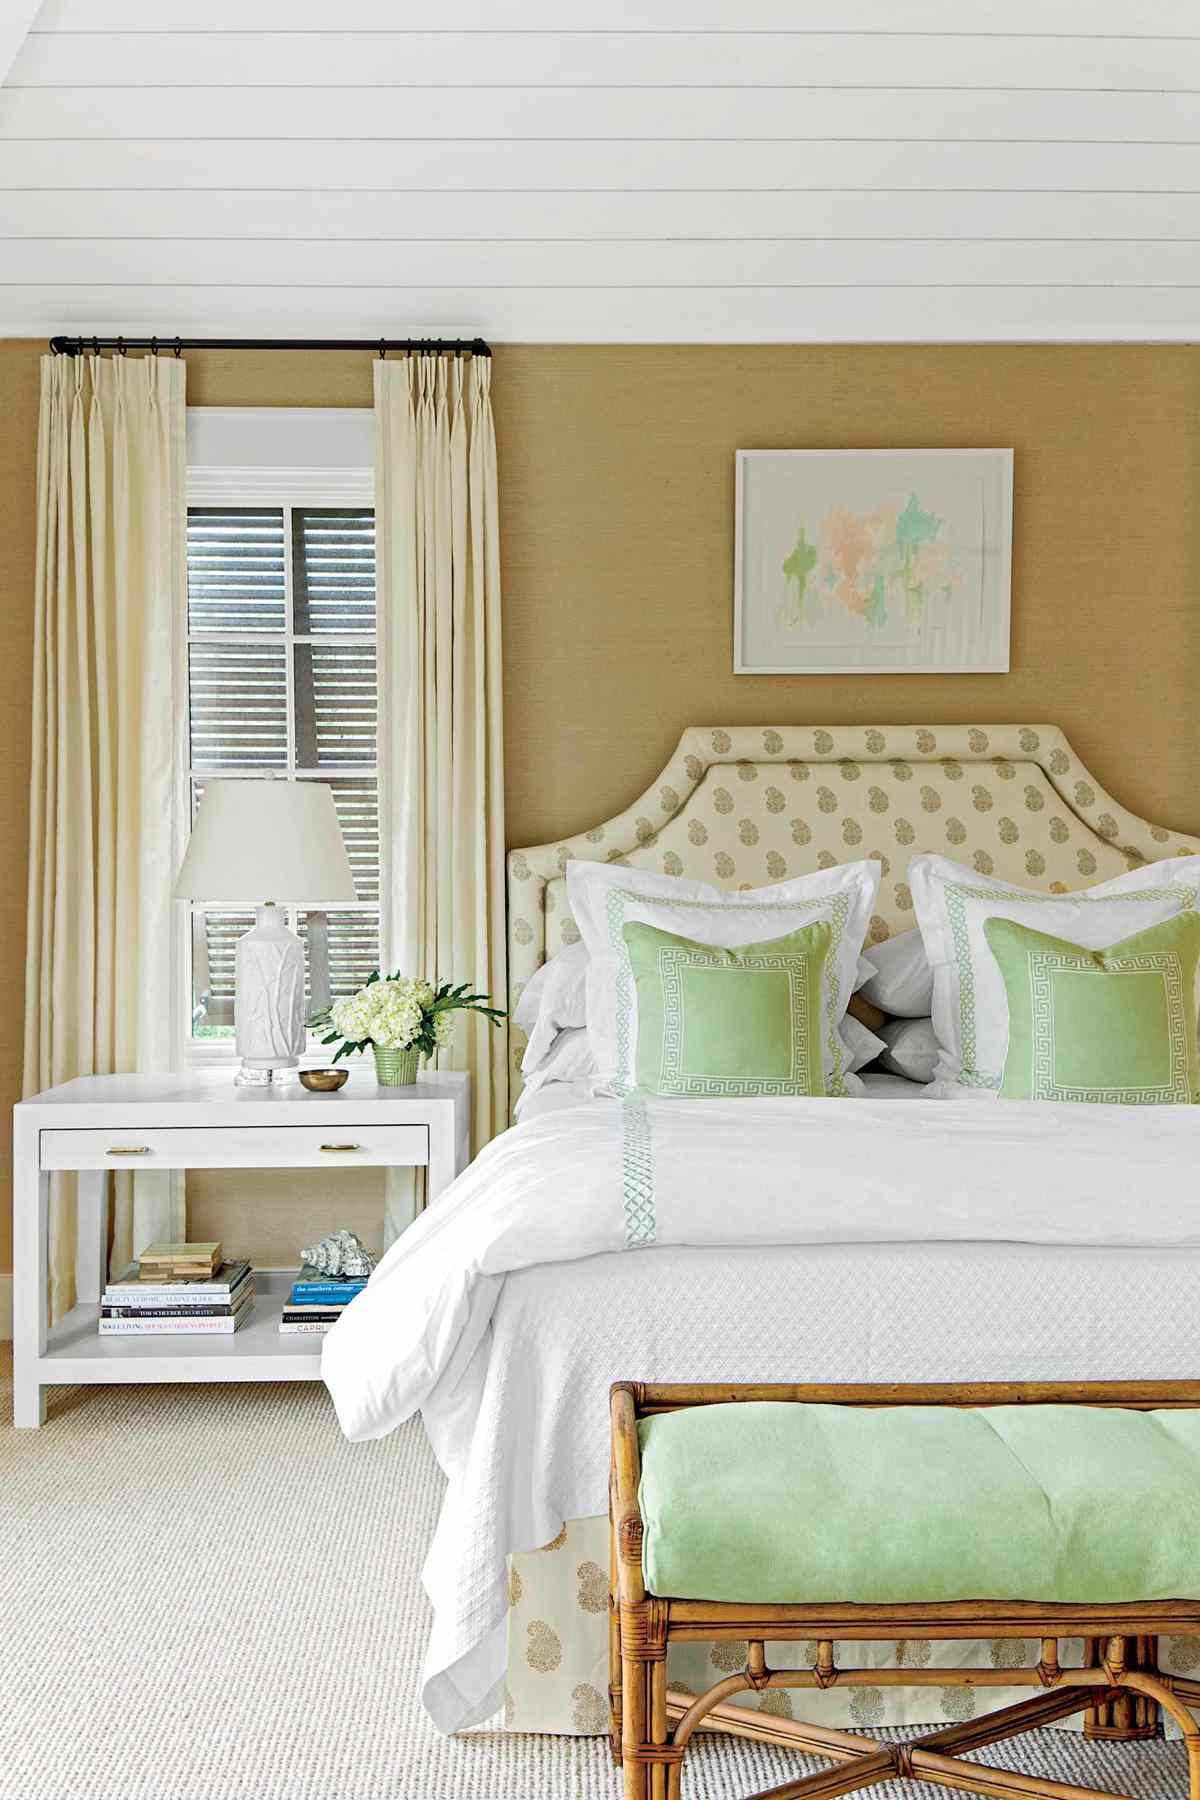 Main Bedroom Decorating Ideas   Southern Living